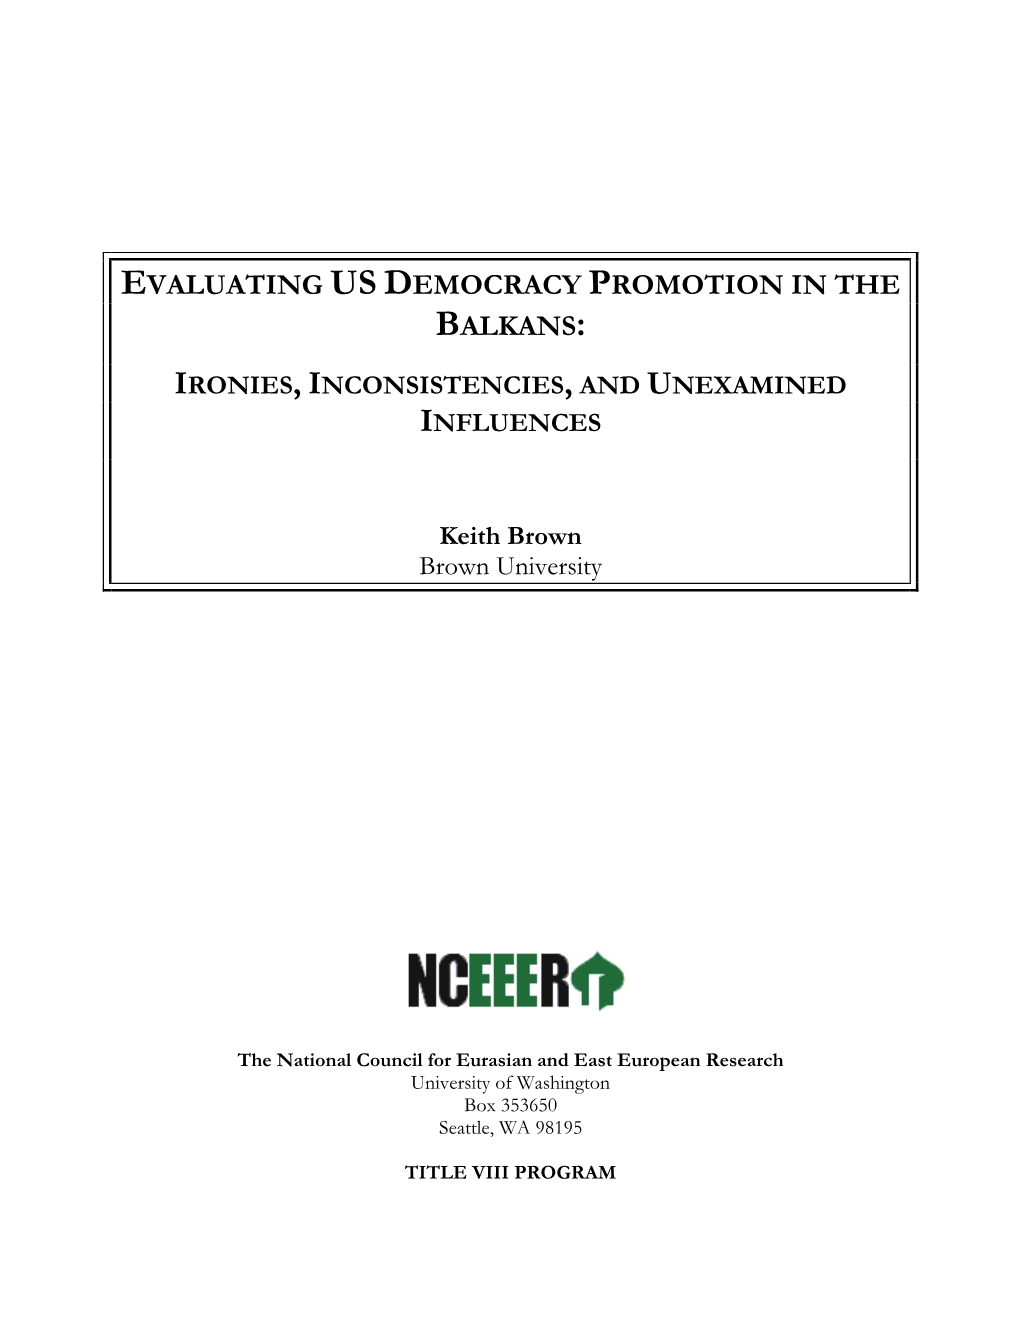 Evaluating US Democracy Promotion in the Balkans: Ironies, Inconsistencies, and Unexamined Influences